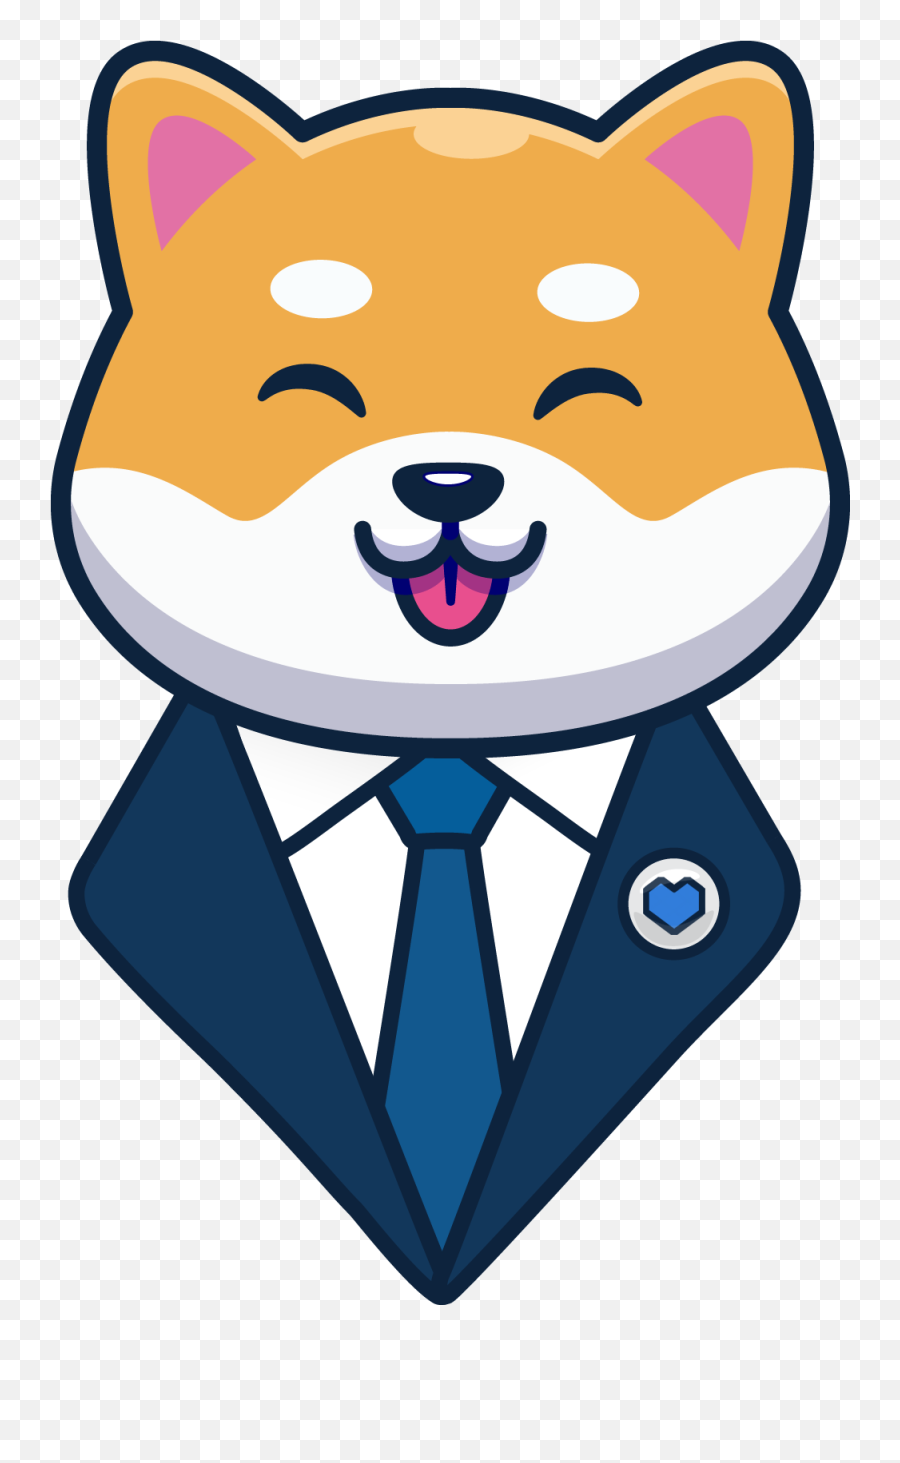 Bankerdoge Official Website Adding Defi Features To Any Emoji,Doge Emojis Discord